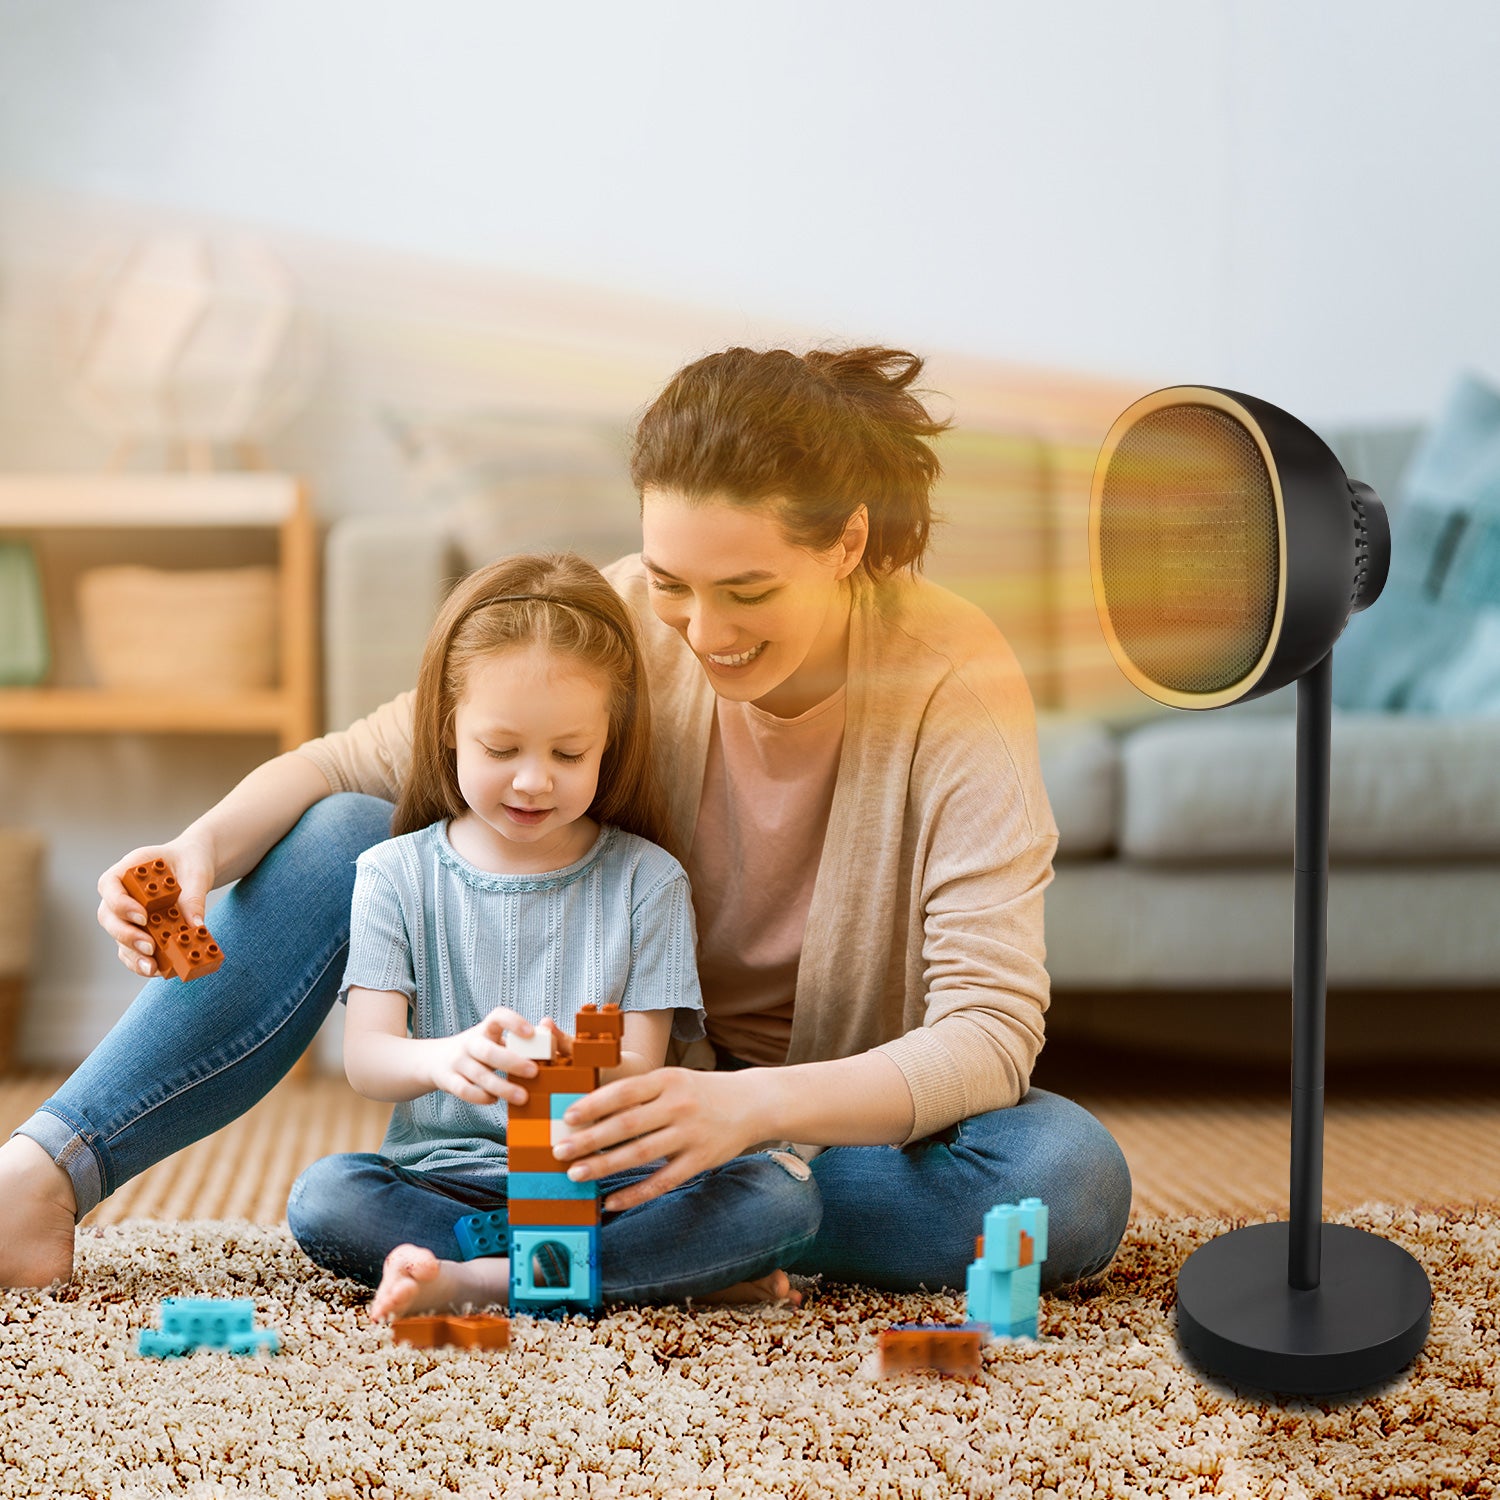 Mother playing with her daughter sitting beside an electric heater